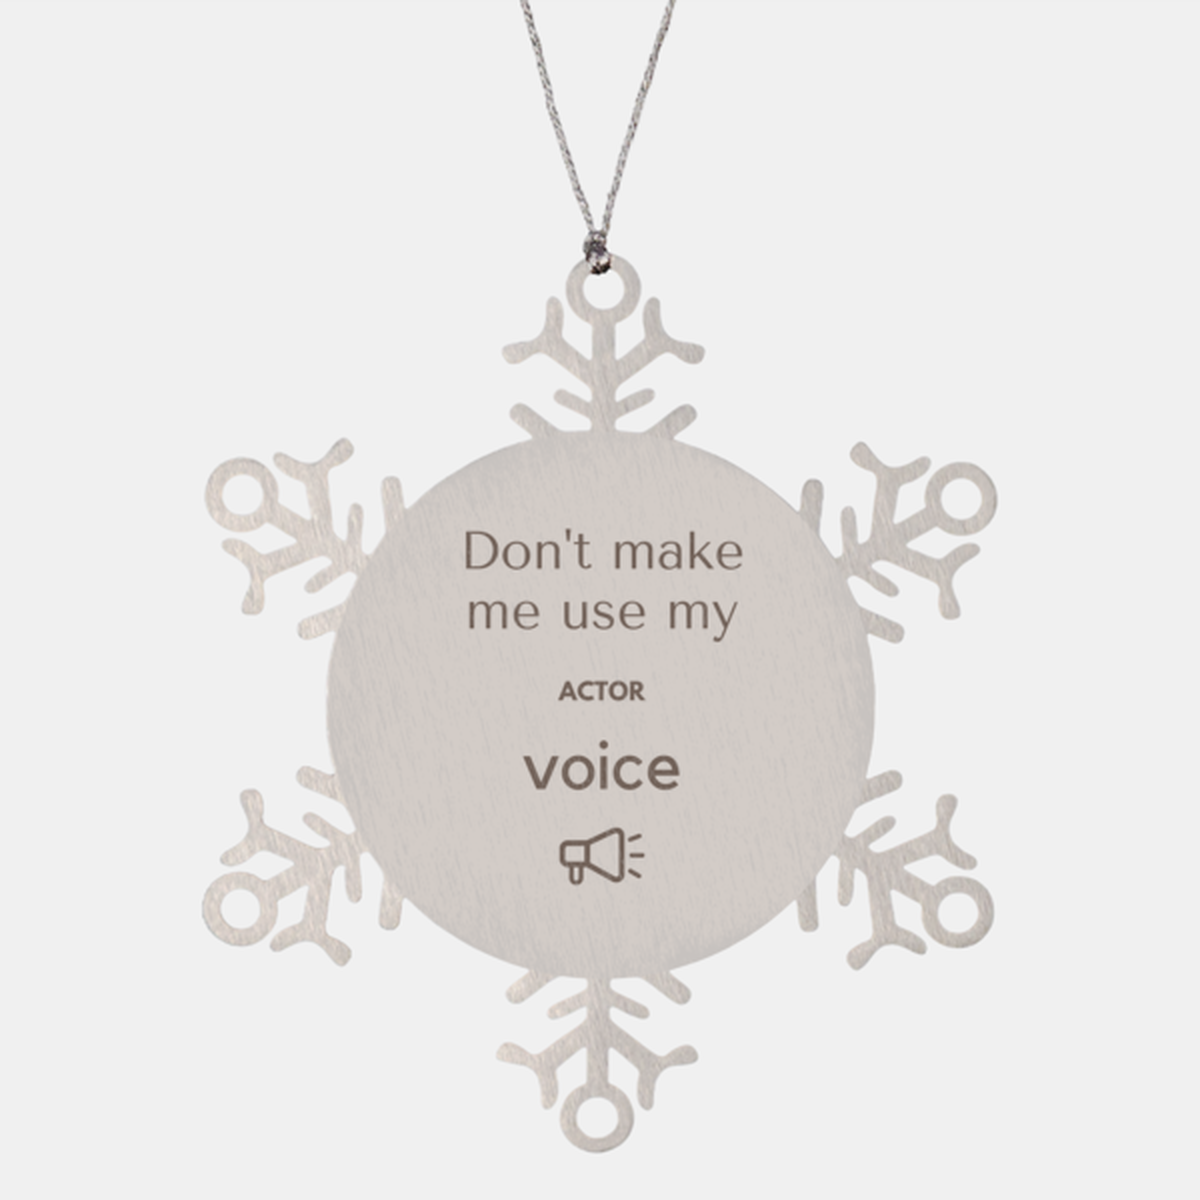 Don't make me use my Actor voice, Sarcasm Actor Ornament Gifts, Christmas Actor Snowflake Ornament Unique Gifts For Actor Coworkers, Men, Women, Colleague, Friends